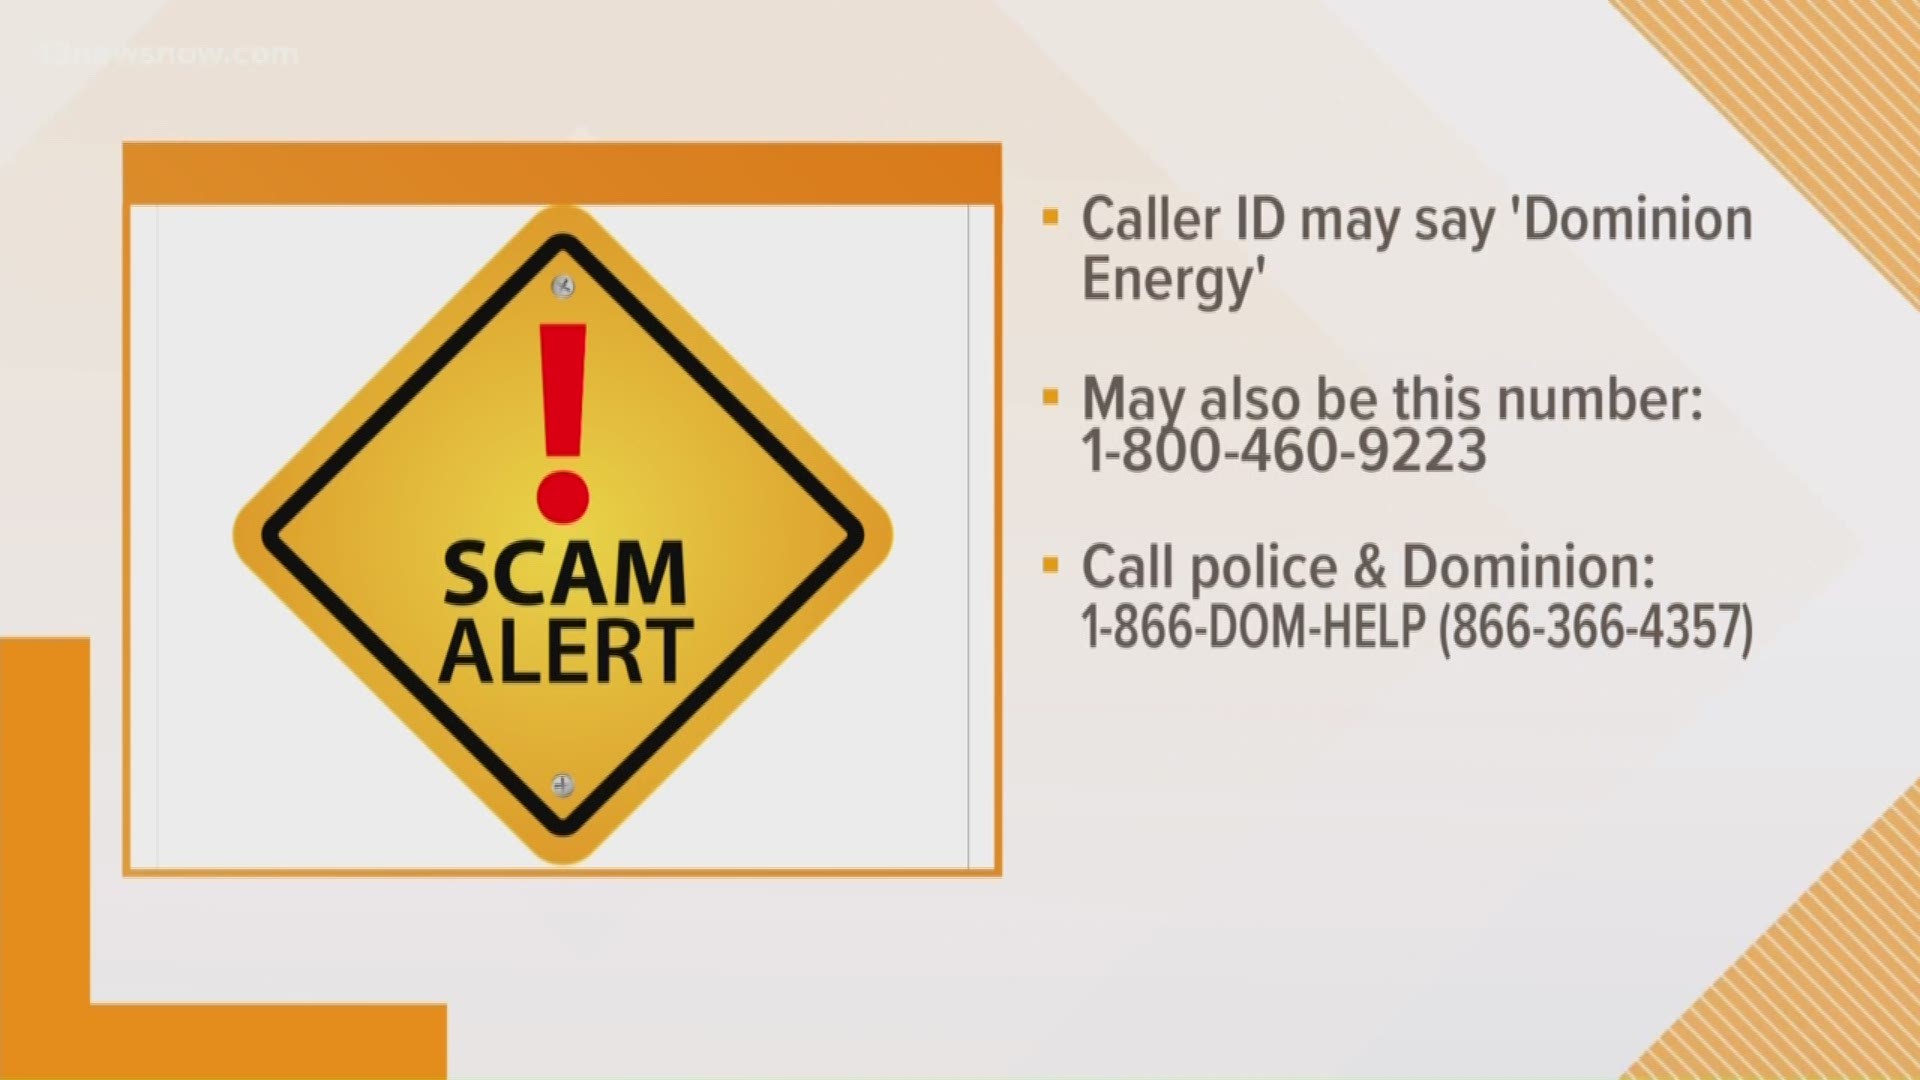 Dominion customers are being warned about a scam recently circulating.